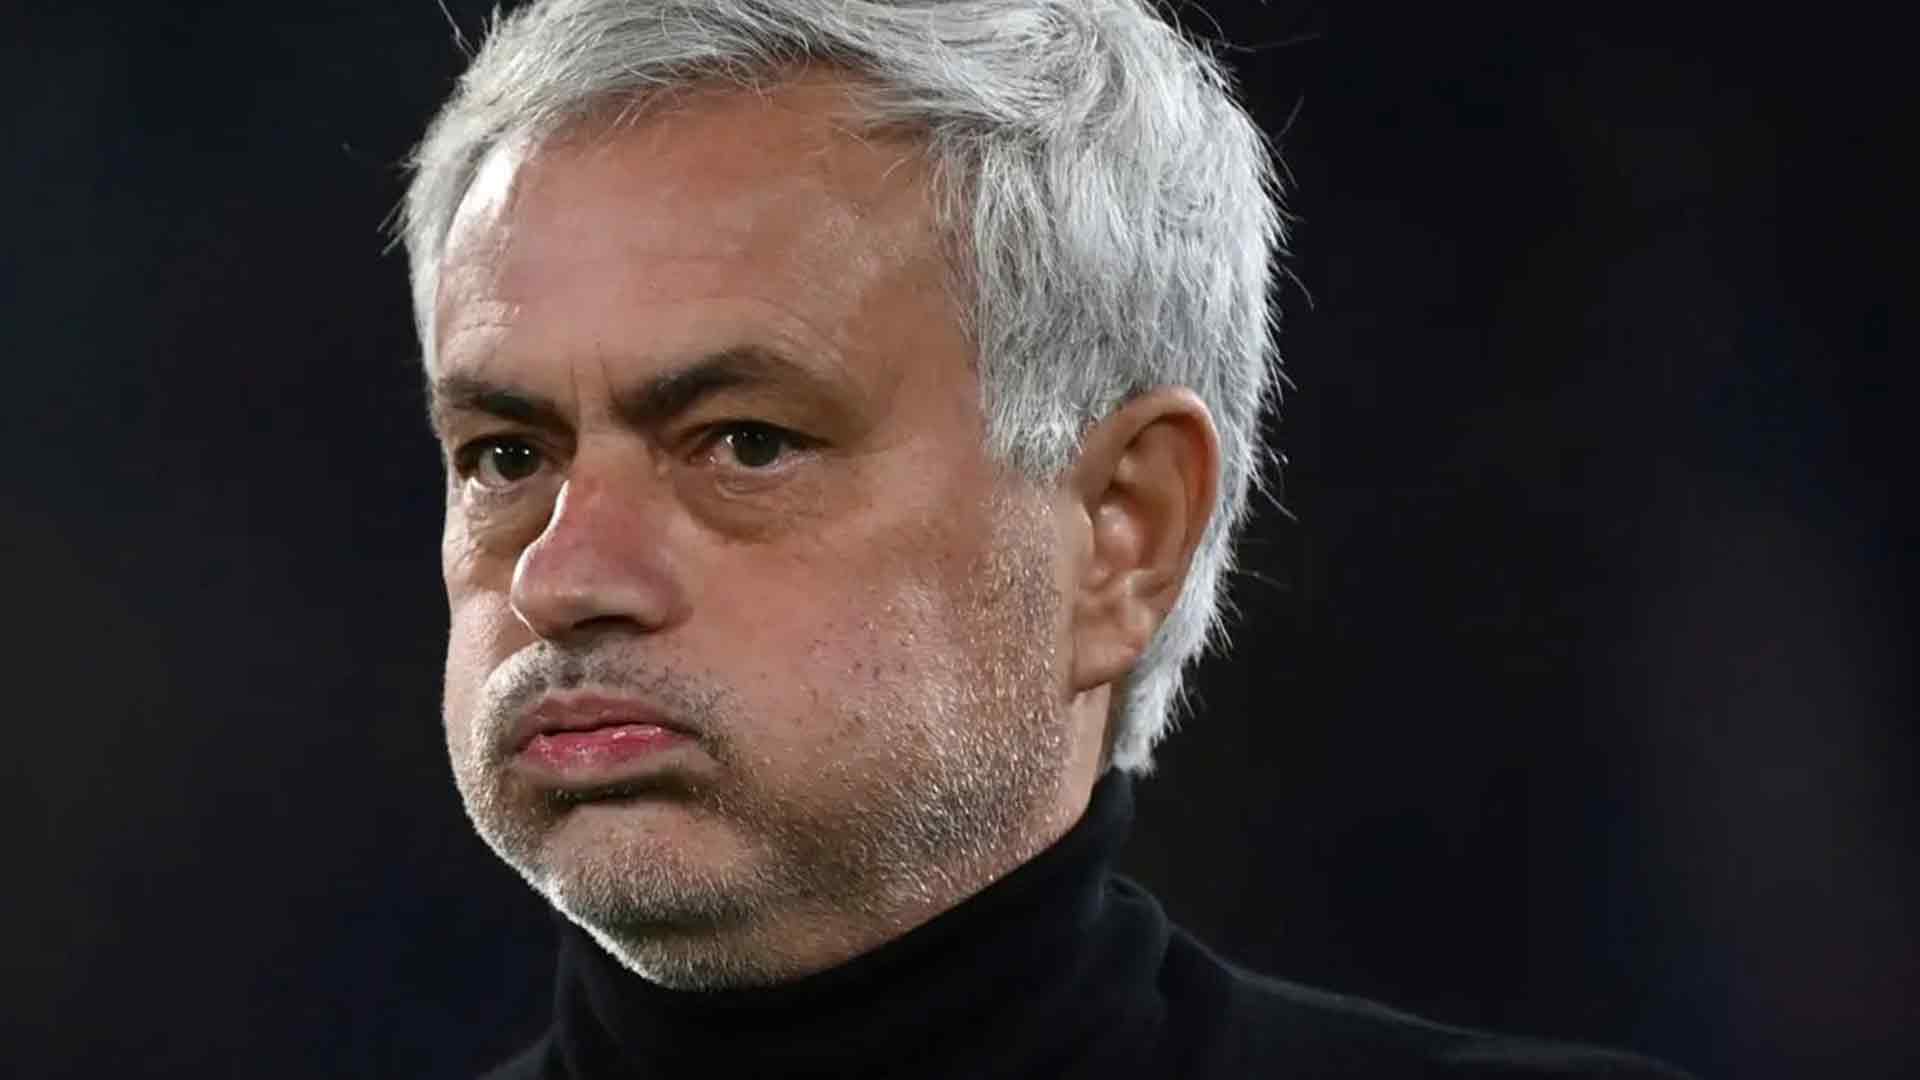 Mourinho fired from Roma